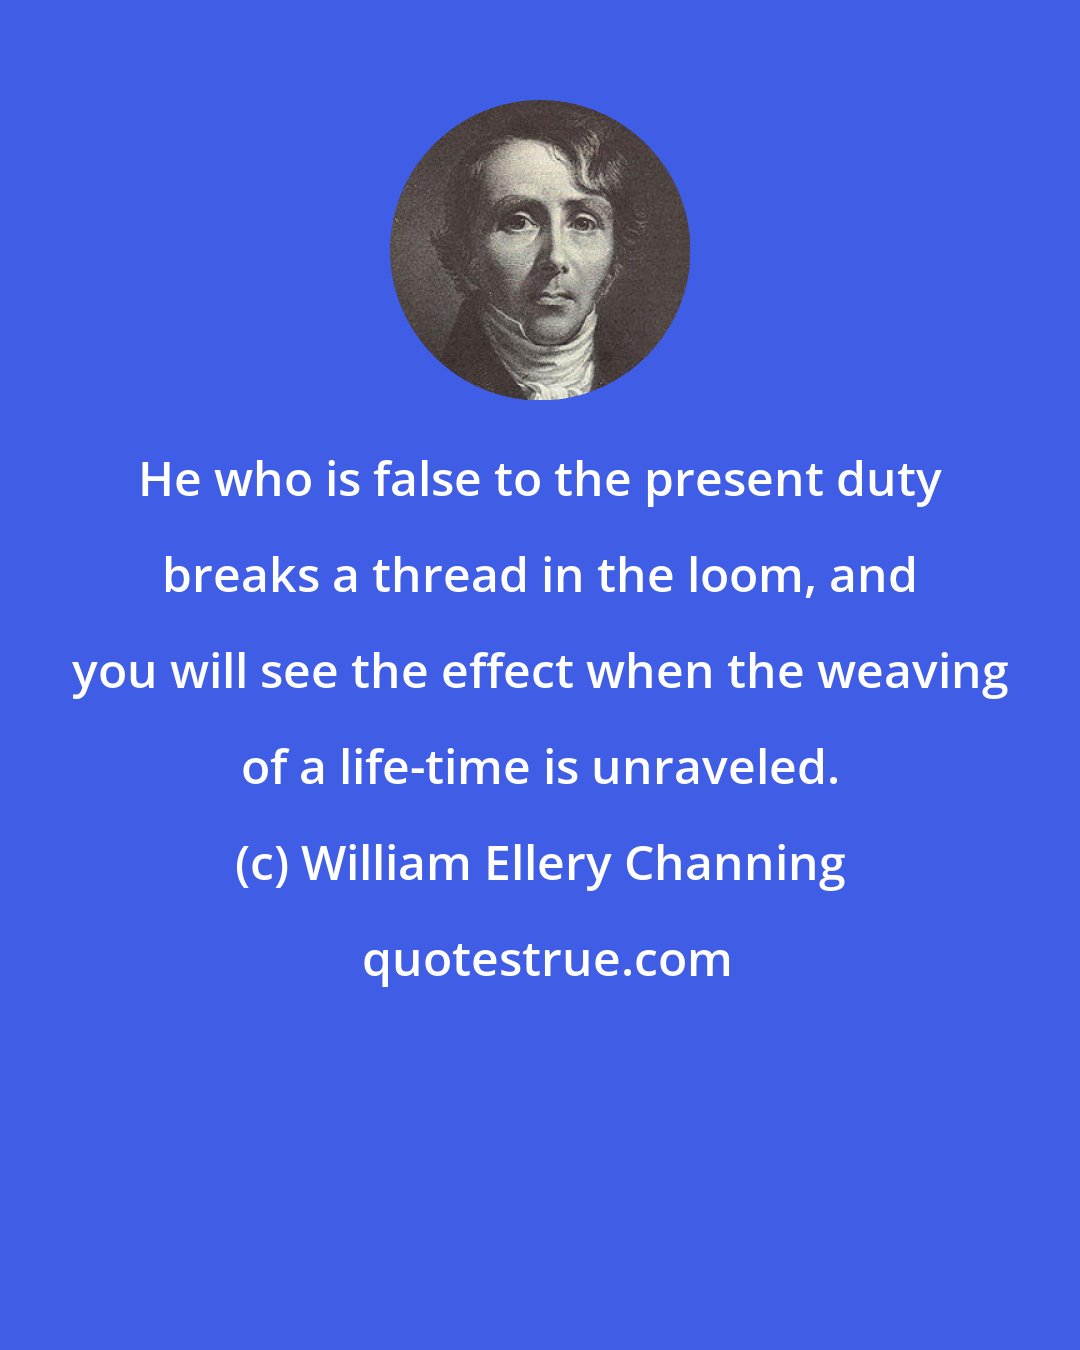 William Ellery Channing: He who is false to the present duty breaks a thread in the loom, and you will see the effect when the weaving of a life-time is unraveled.